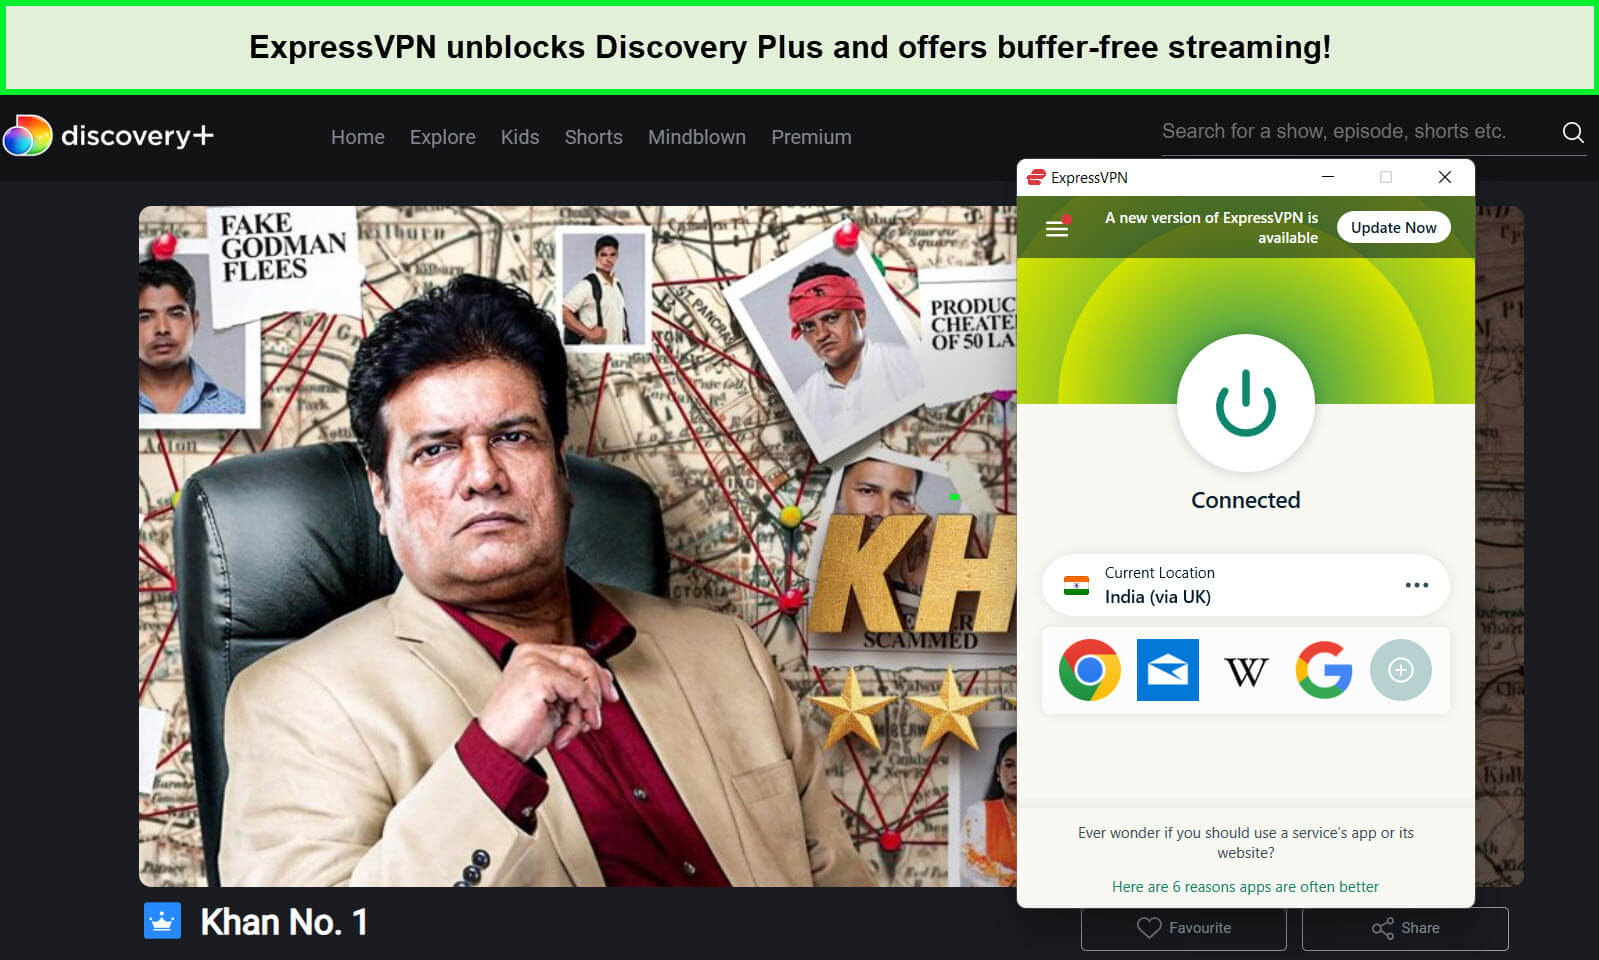 expressvpn-unblocks-khan-no-1-on-discovery-plus-in-new-zealand